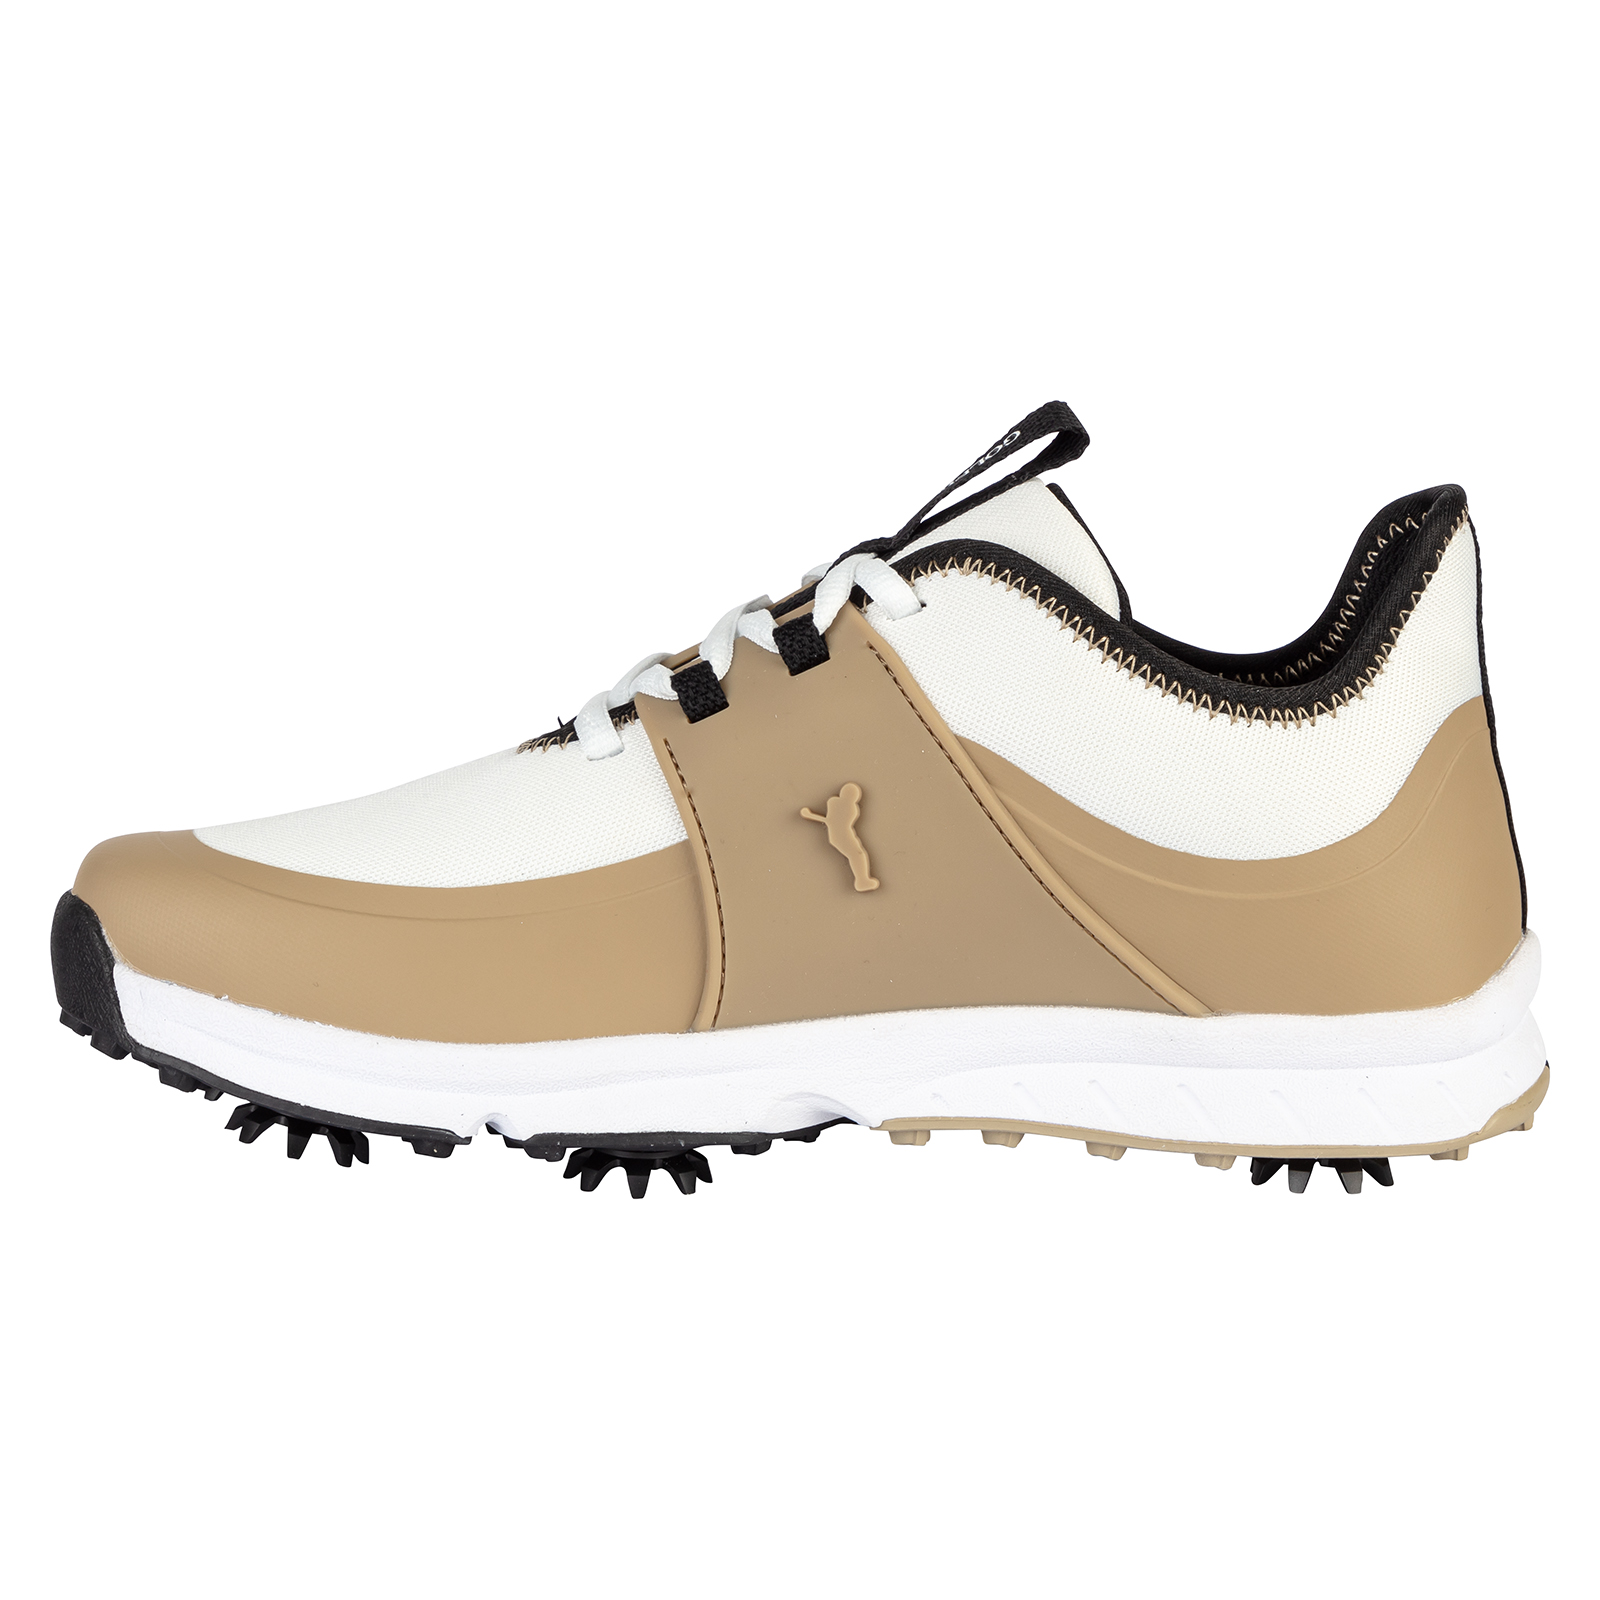 Ladies' waterproof golf shoes with removable spikes